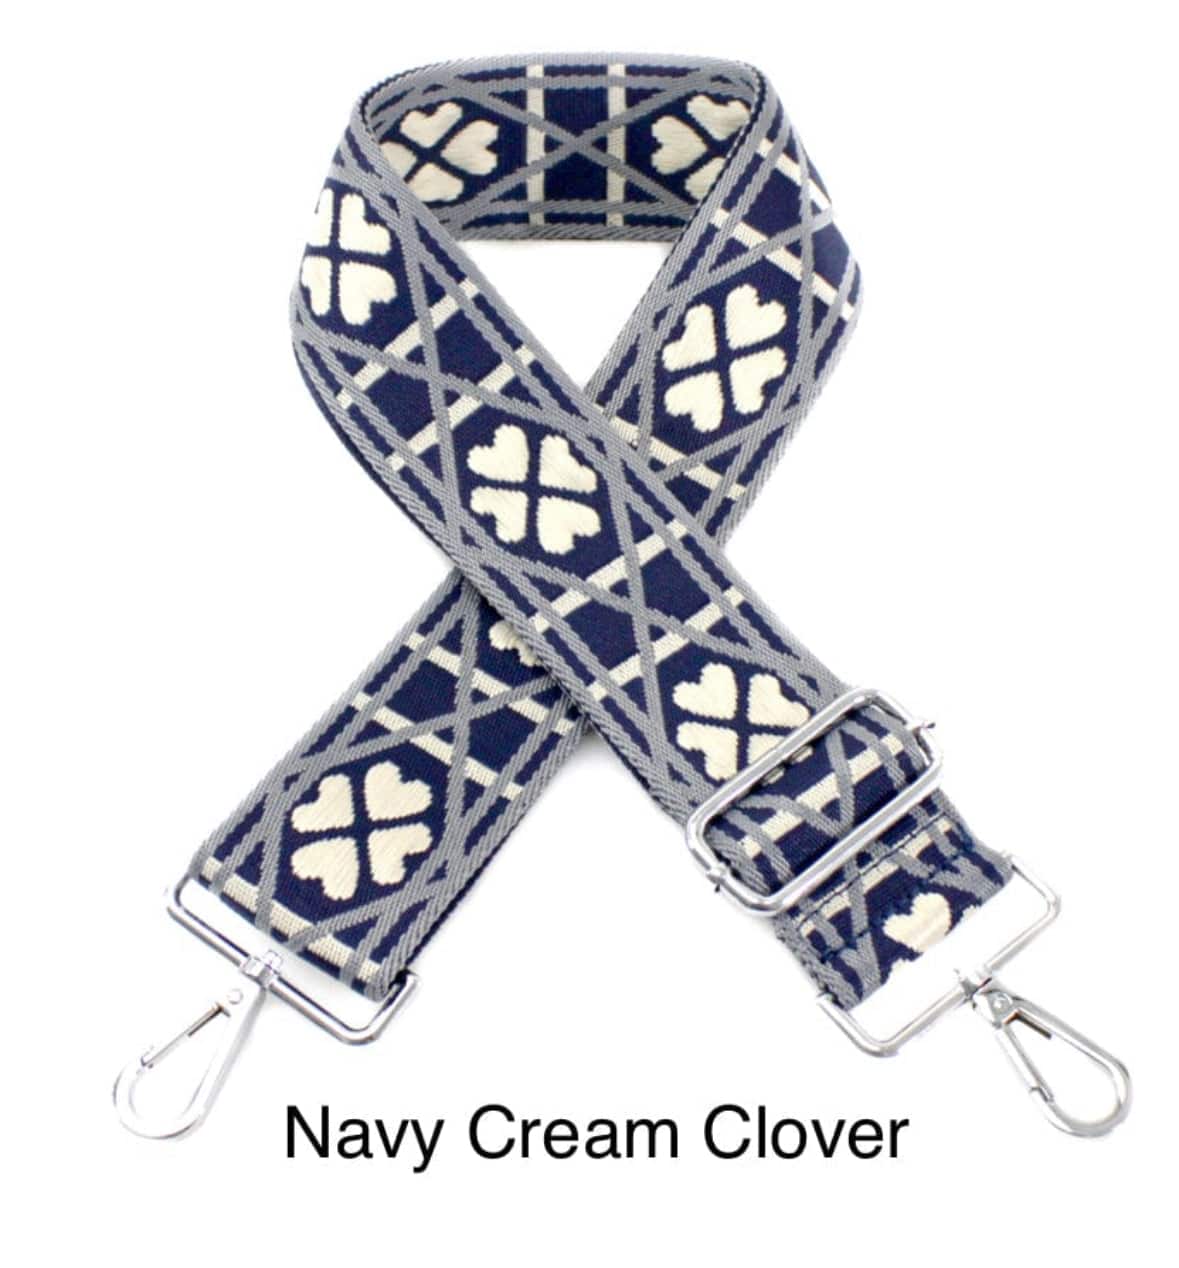 lusciousscarves Handbags Navy and Cream Clover Handbag Bag Straps with SILVER HARDWARE - Lots of colours available.